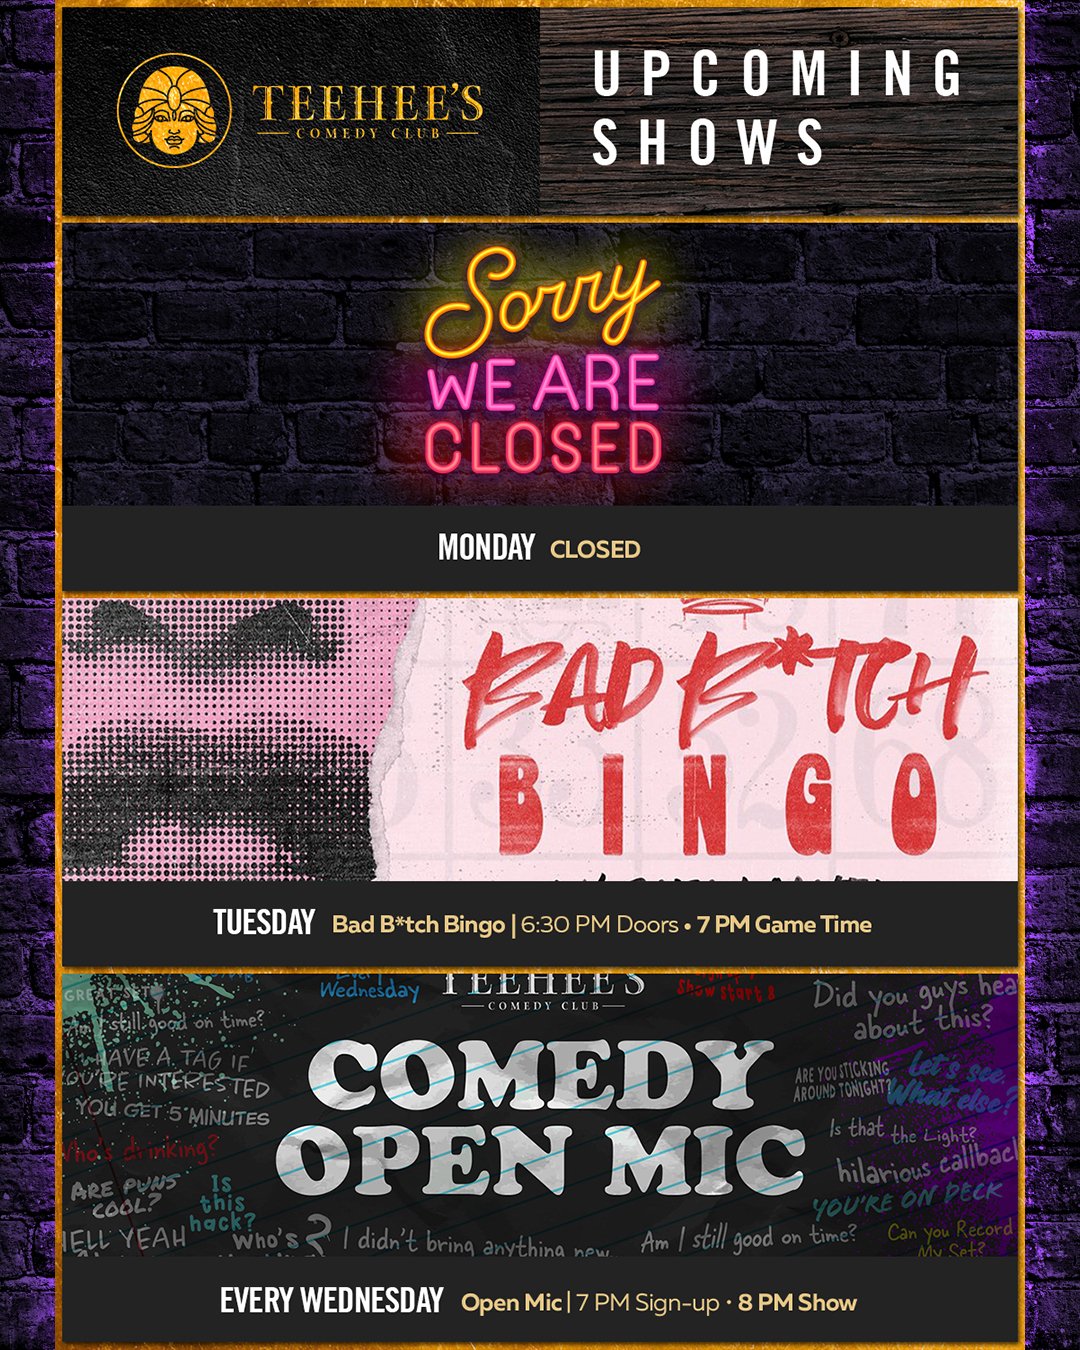 🔥🎤🔥 This week we have your standard issue blockbuster mid-week lineup followed by the club becoming Phil City, USA for the weekend.
Get 🎟🎟🎟 at teeheescomedy.com/shows